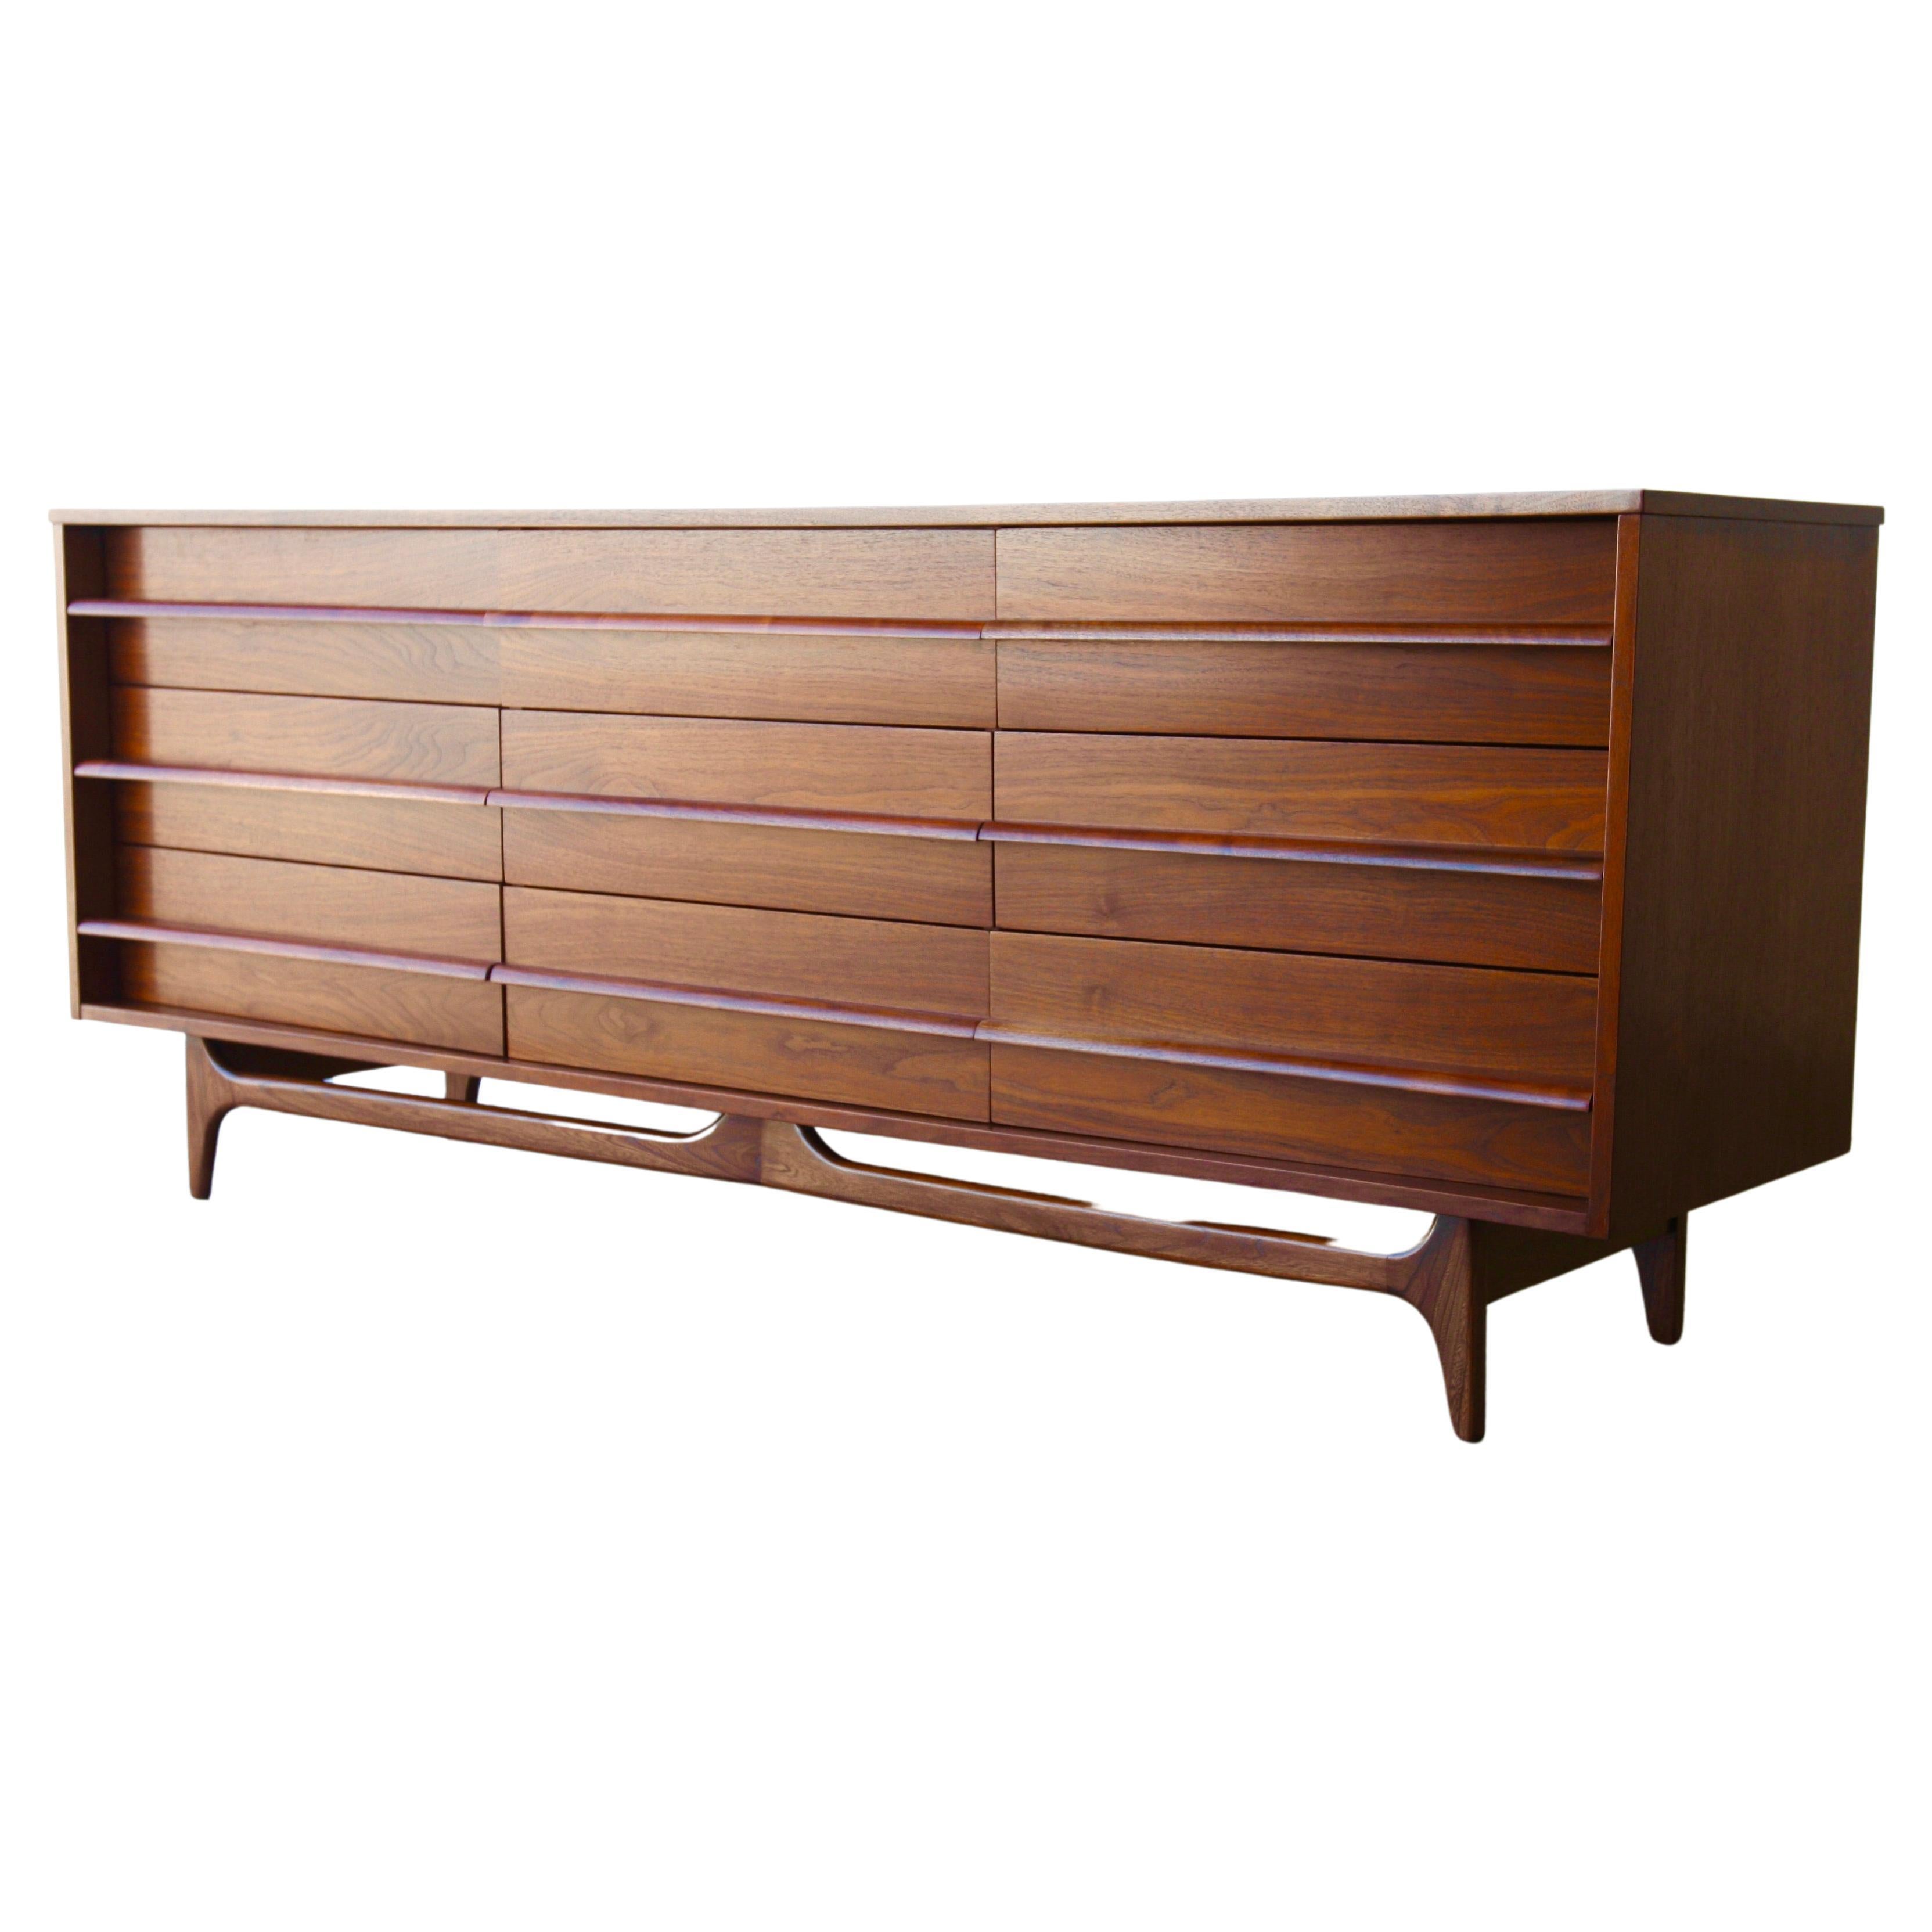 Young Manufacturing Mid Century Walnut Curved Lowboy 9 Drawer Dresser For Sale